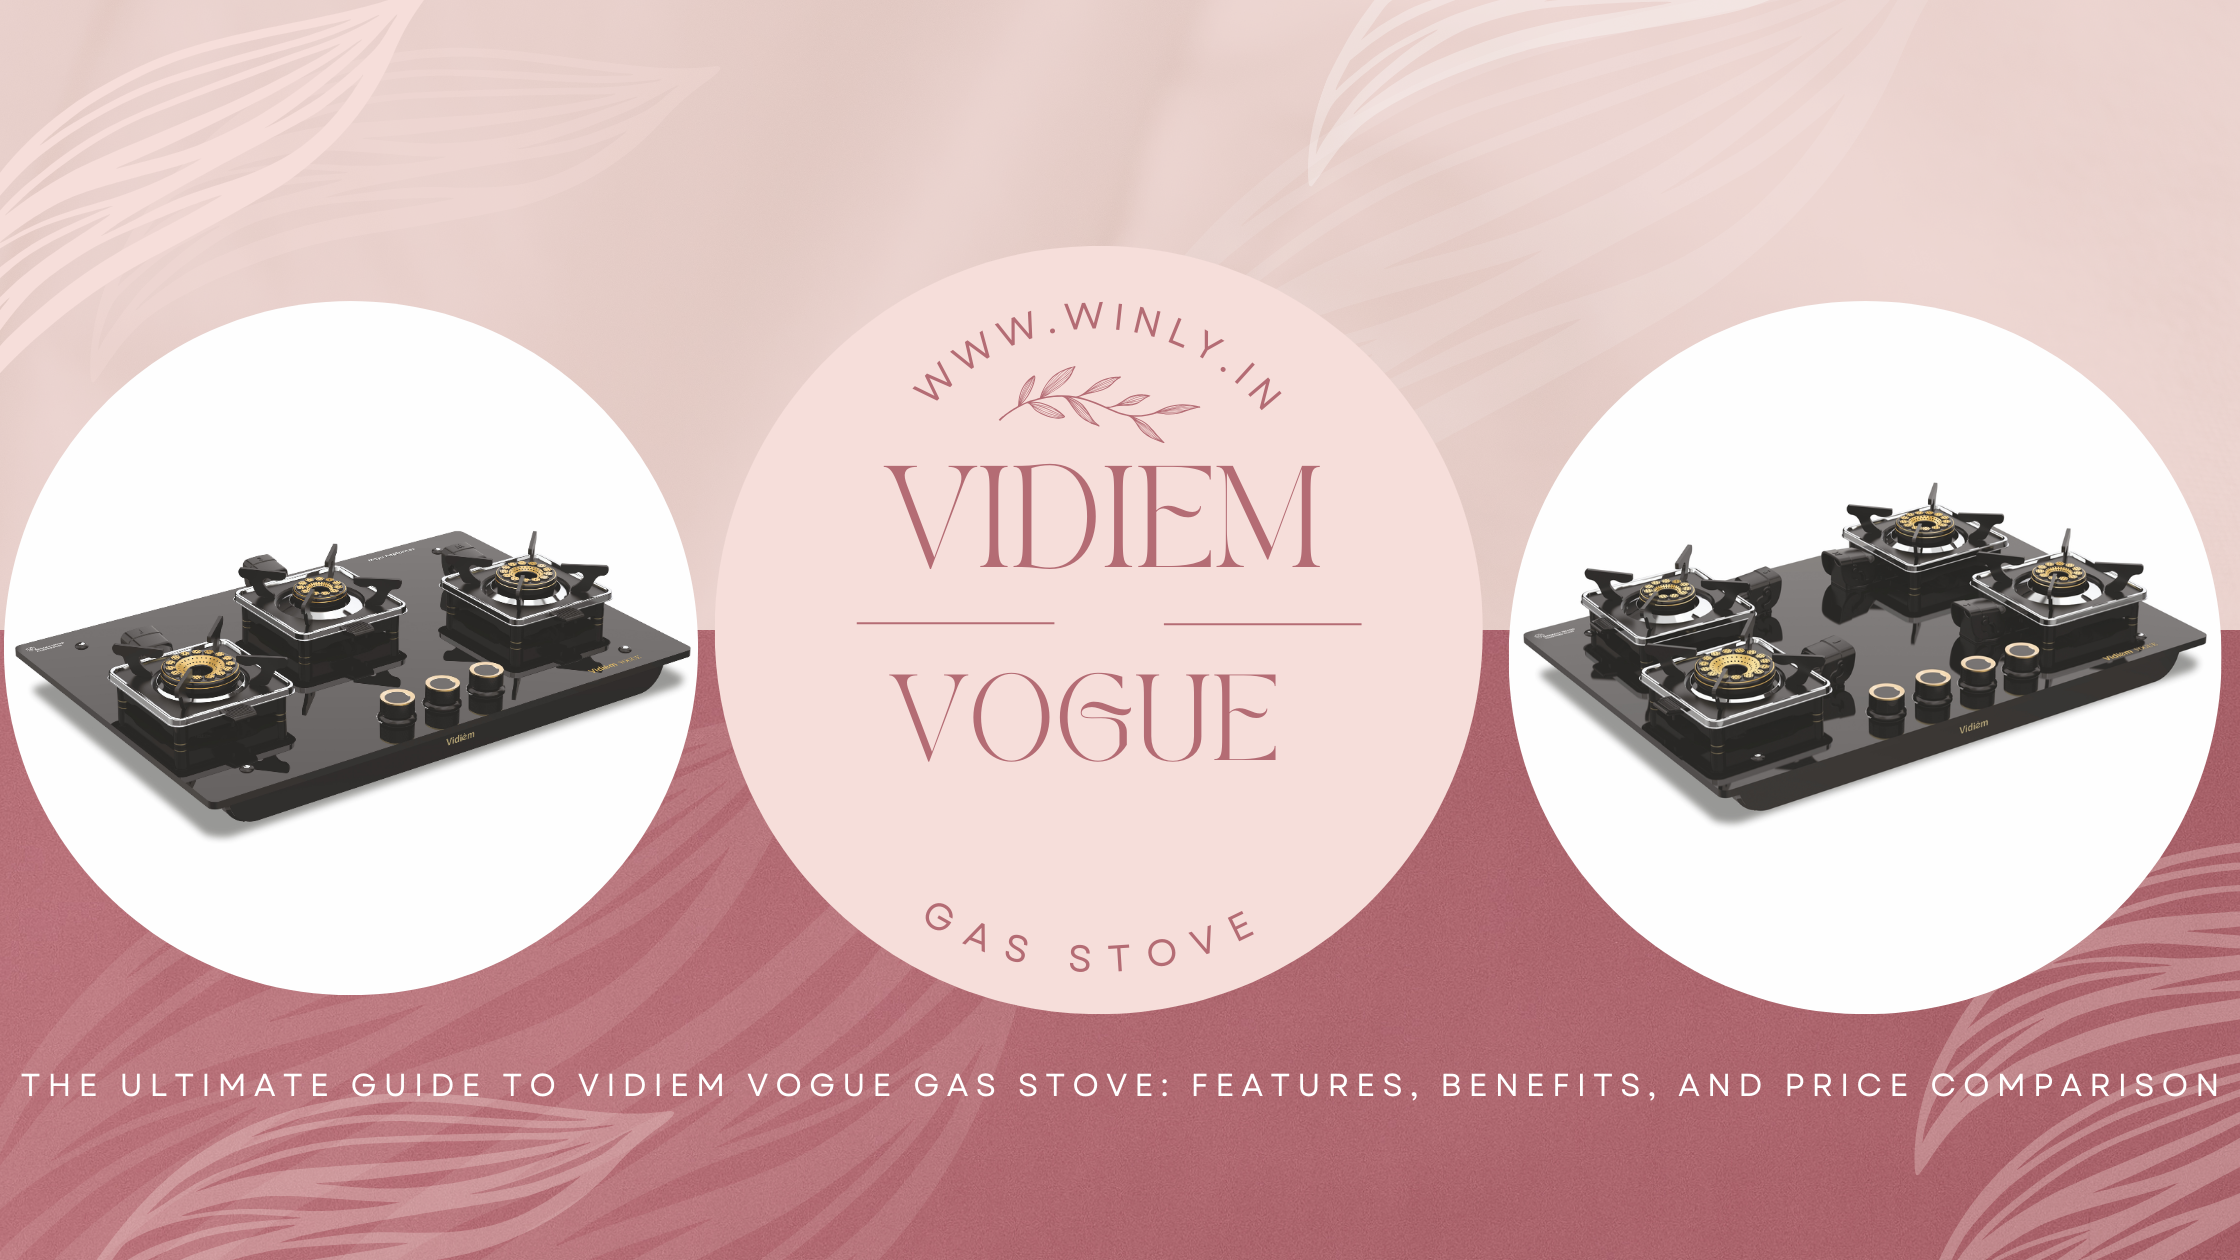 The Ultimate Guide to Vidiem Vogue Gas Stove: Features, Benefits, and Price Comparison